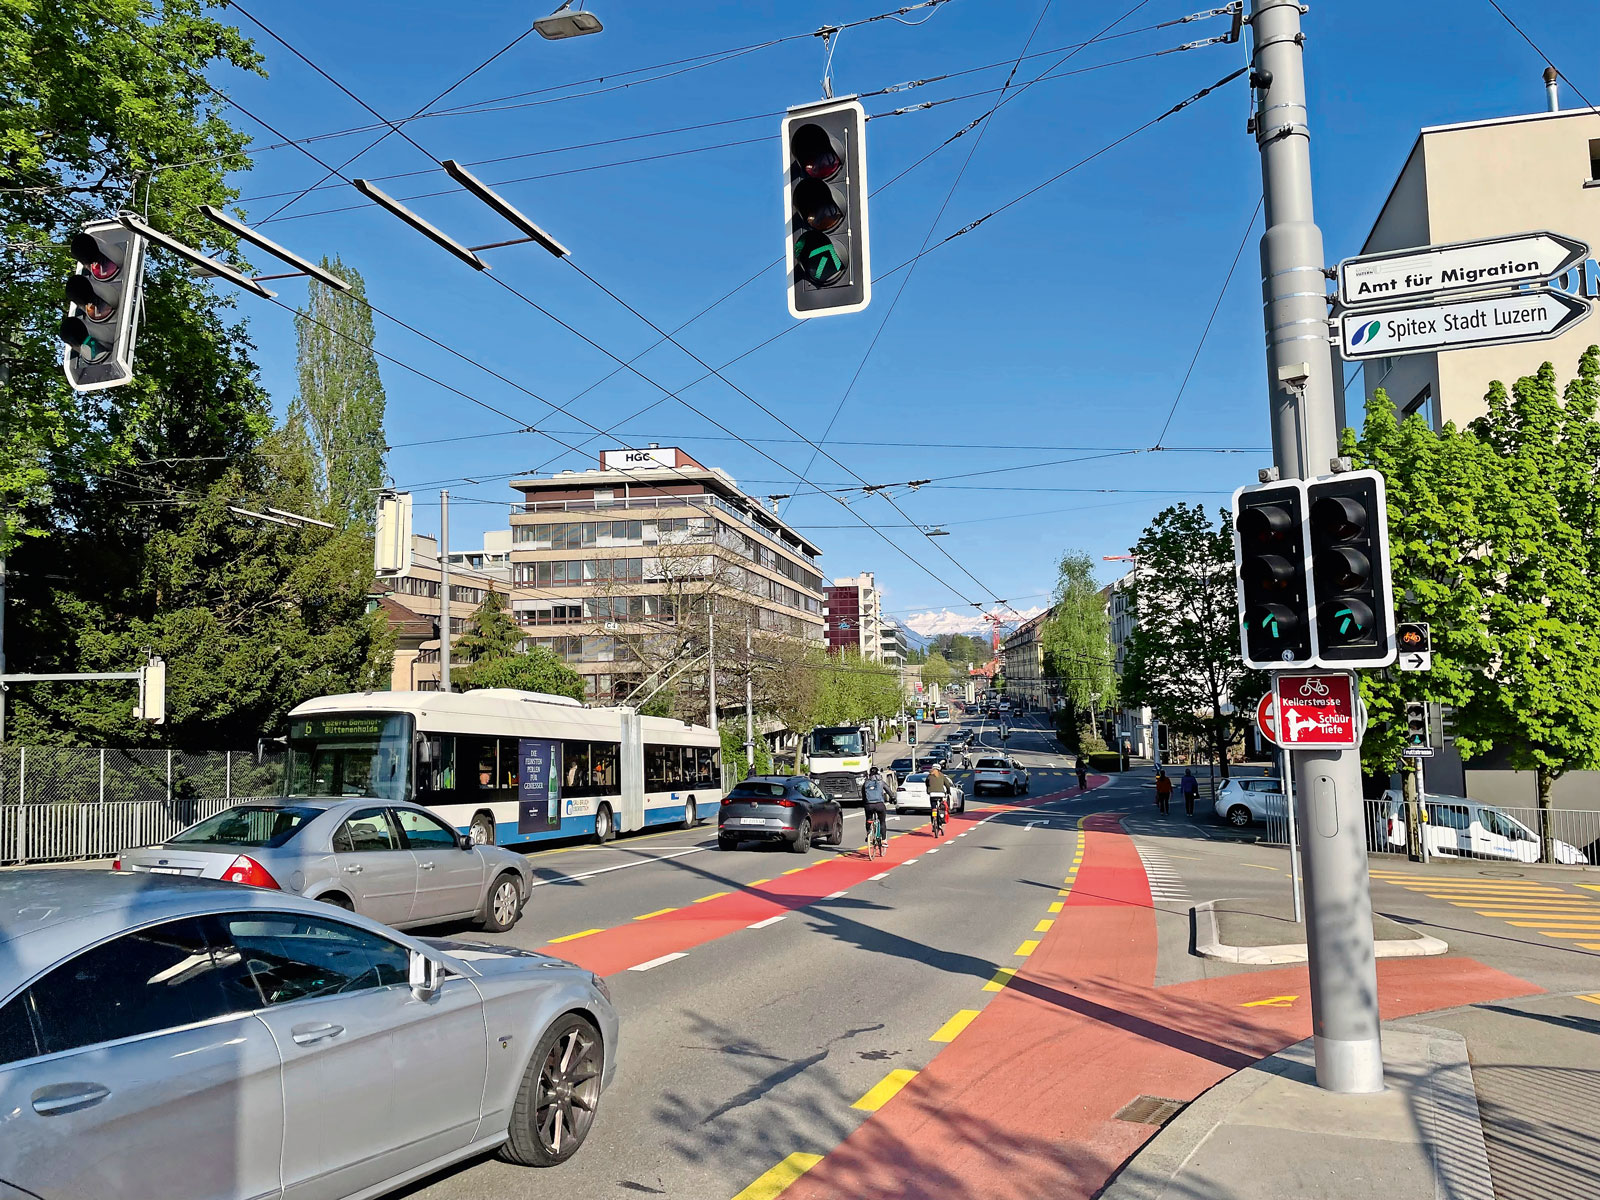 road junction with traffic lights, cyclists, bus and cars